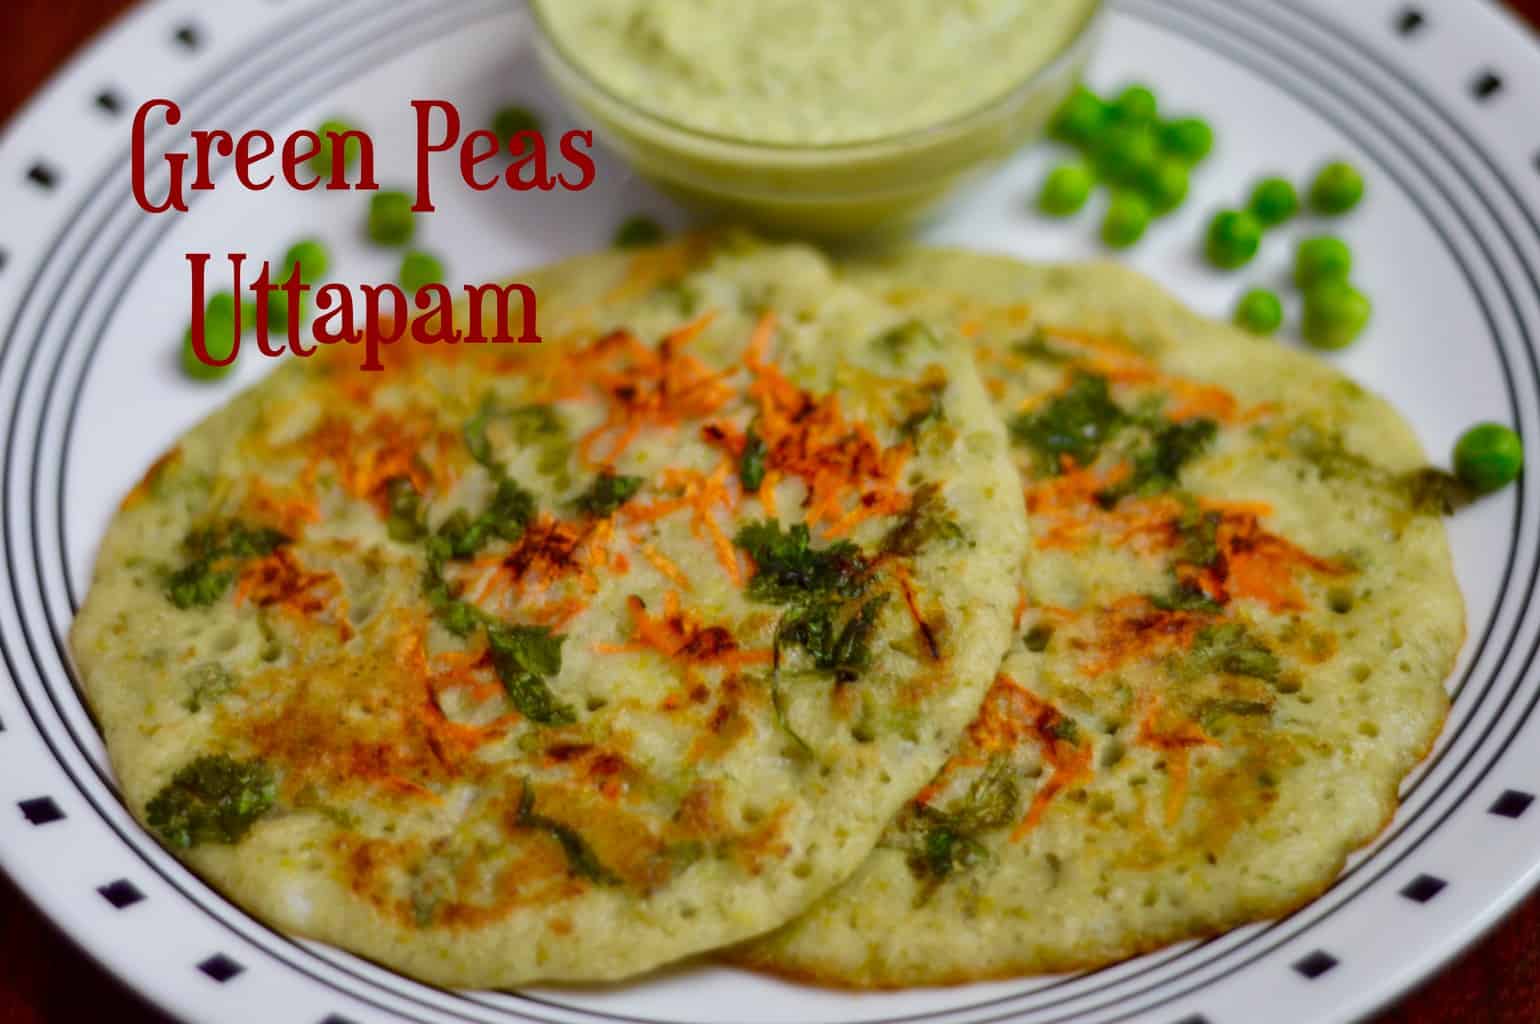 Green Peas Uttapam served on a plate with coconut chutney on the side